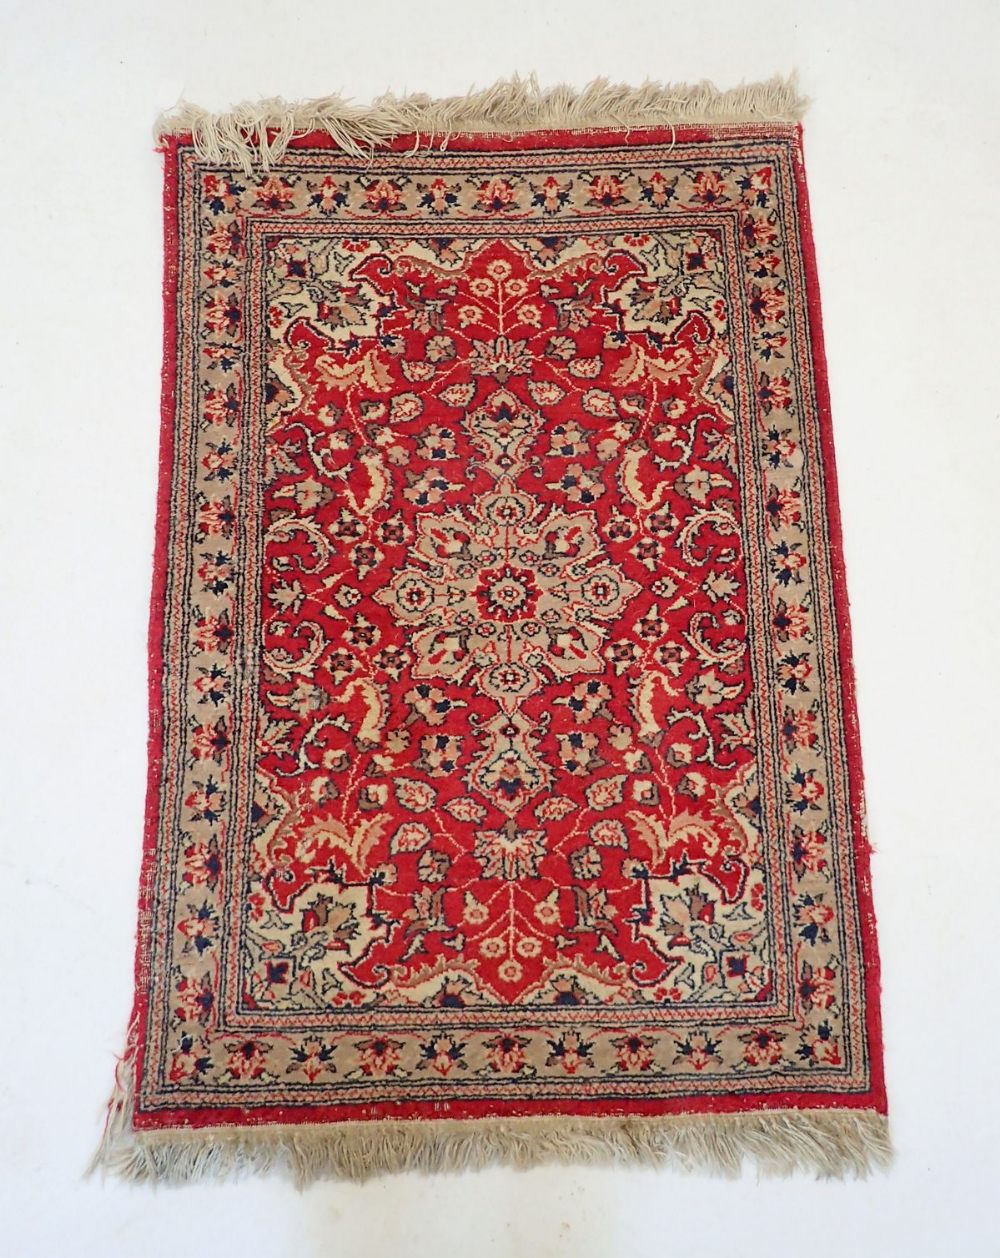 A small Persian style rug with floral medallion on red ground, 96 x 66cm